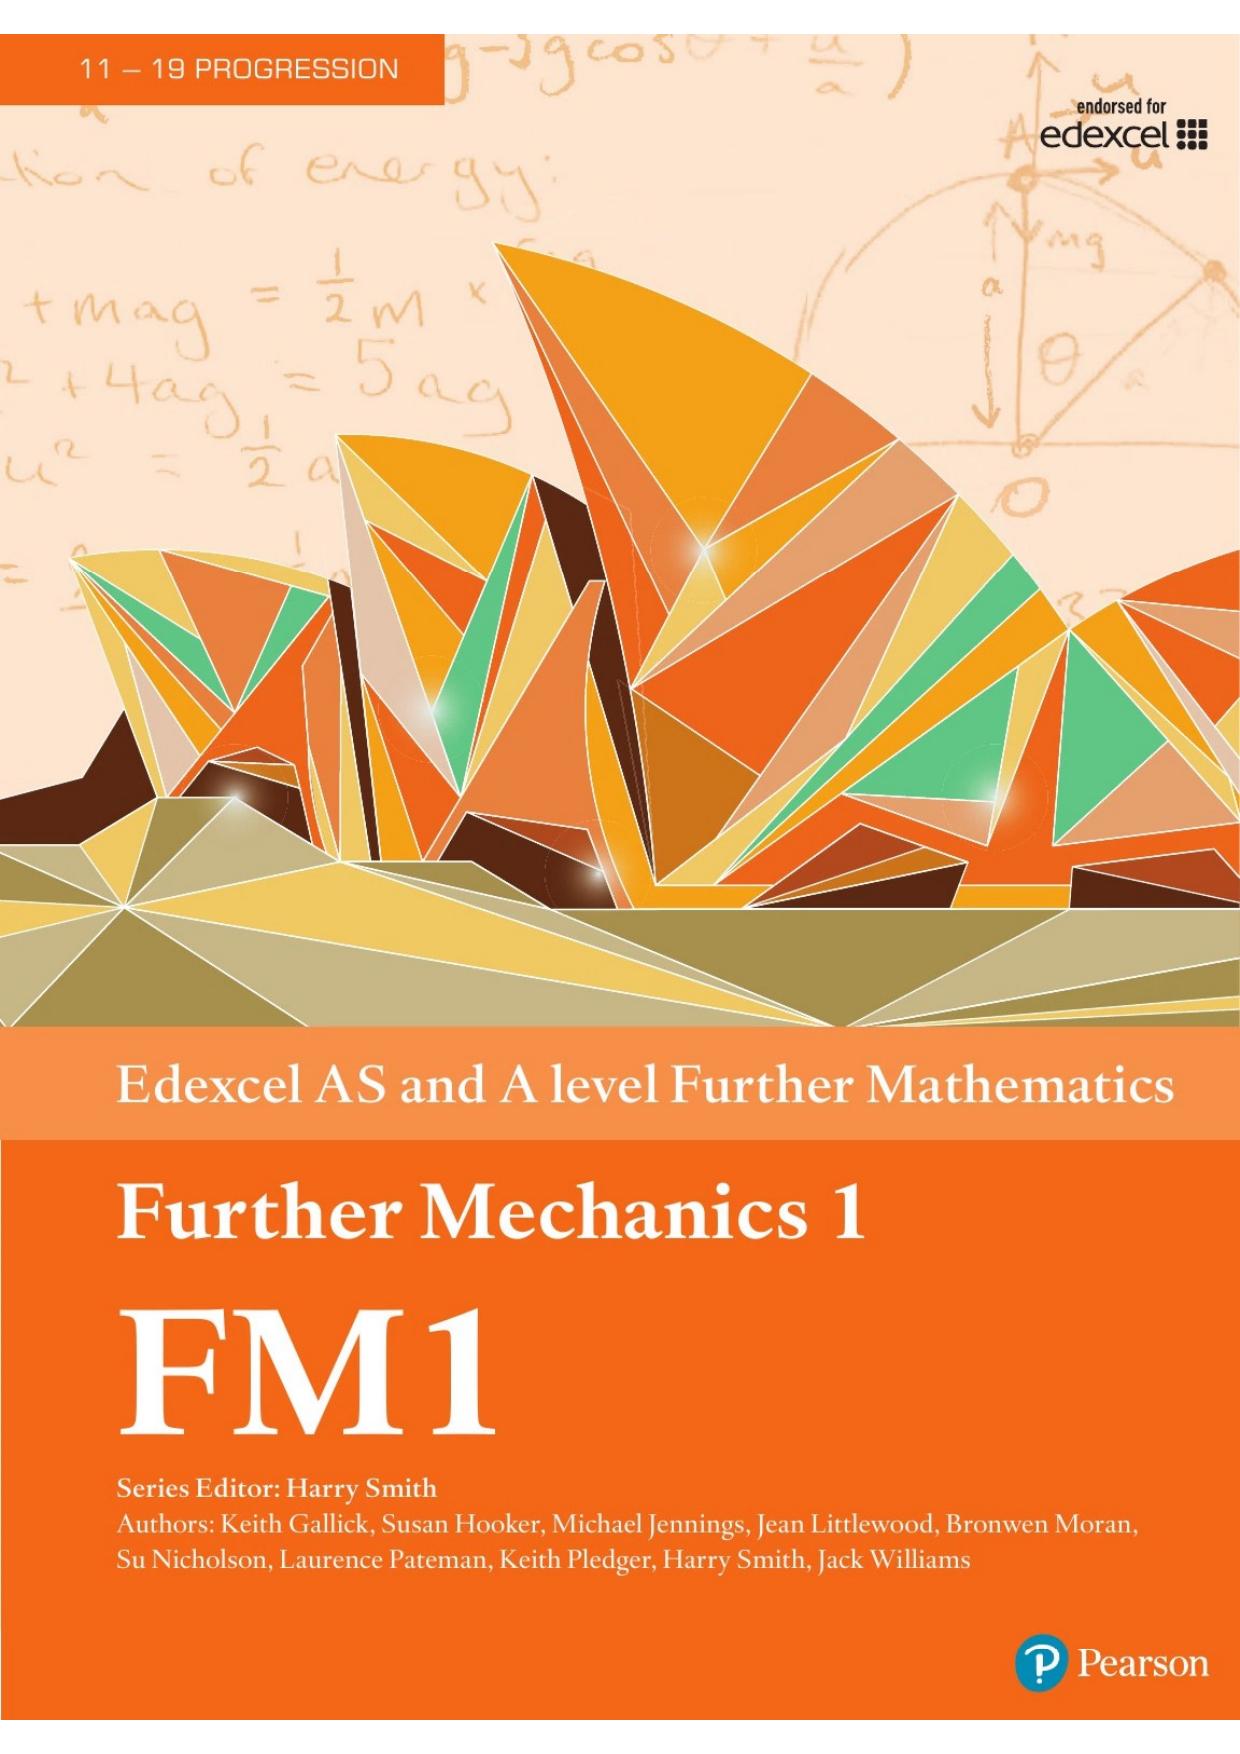 Edexcel AS and A level Further Mechanics 1 FM1